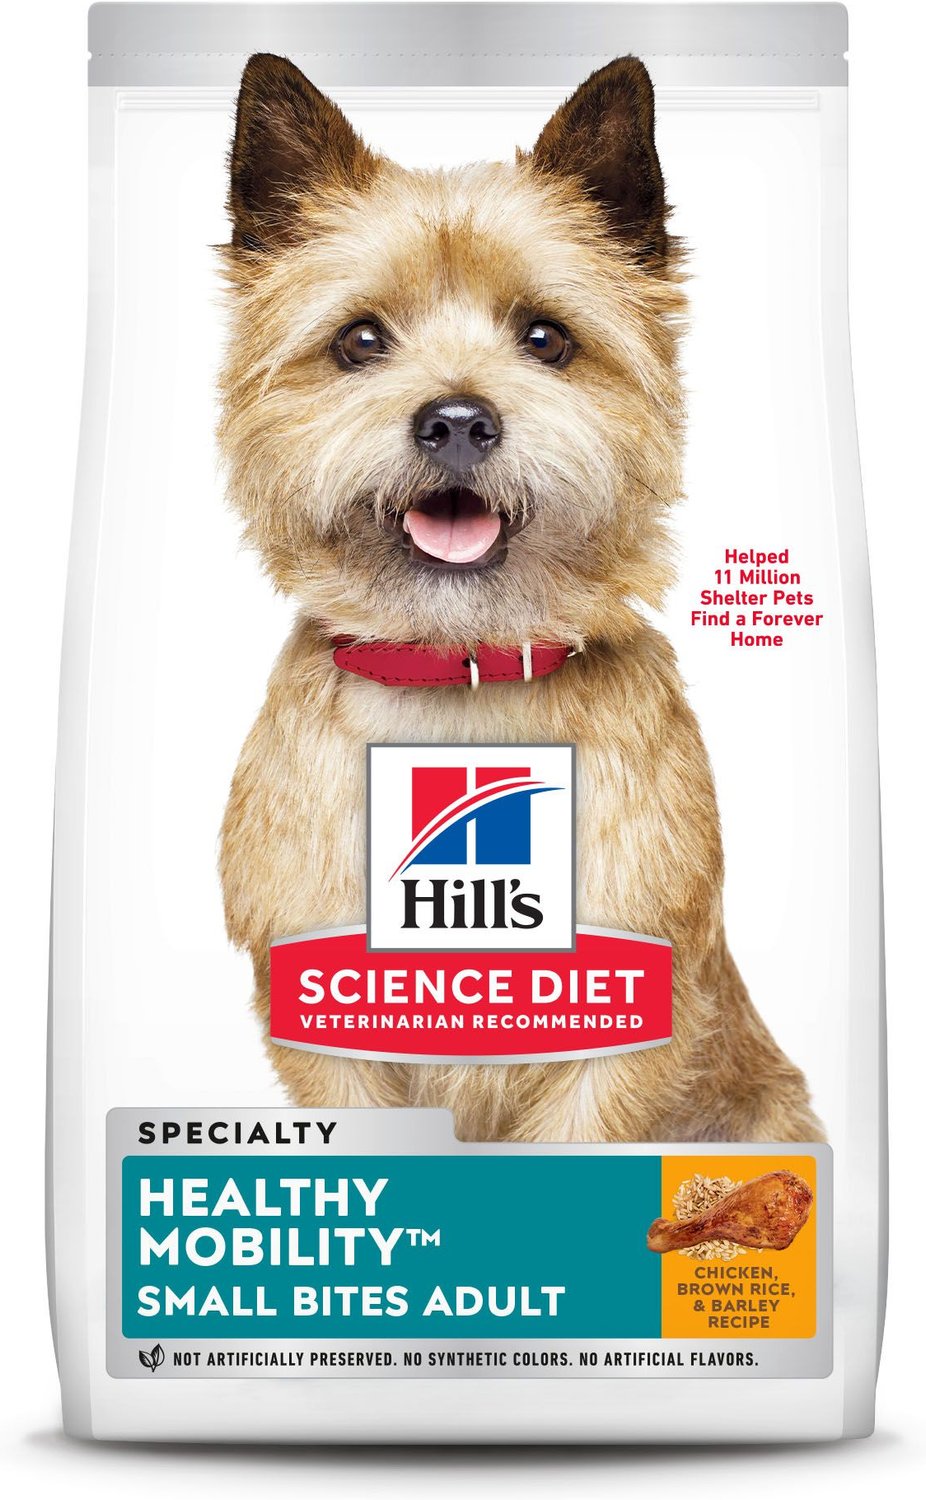 HILL'S SCIENCE DIET Adult Healthy Mobility Small Bites Chicken Meal, Brown Rice & Barley Recipe Dry Dog Food, 4-lb - Chewy.com